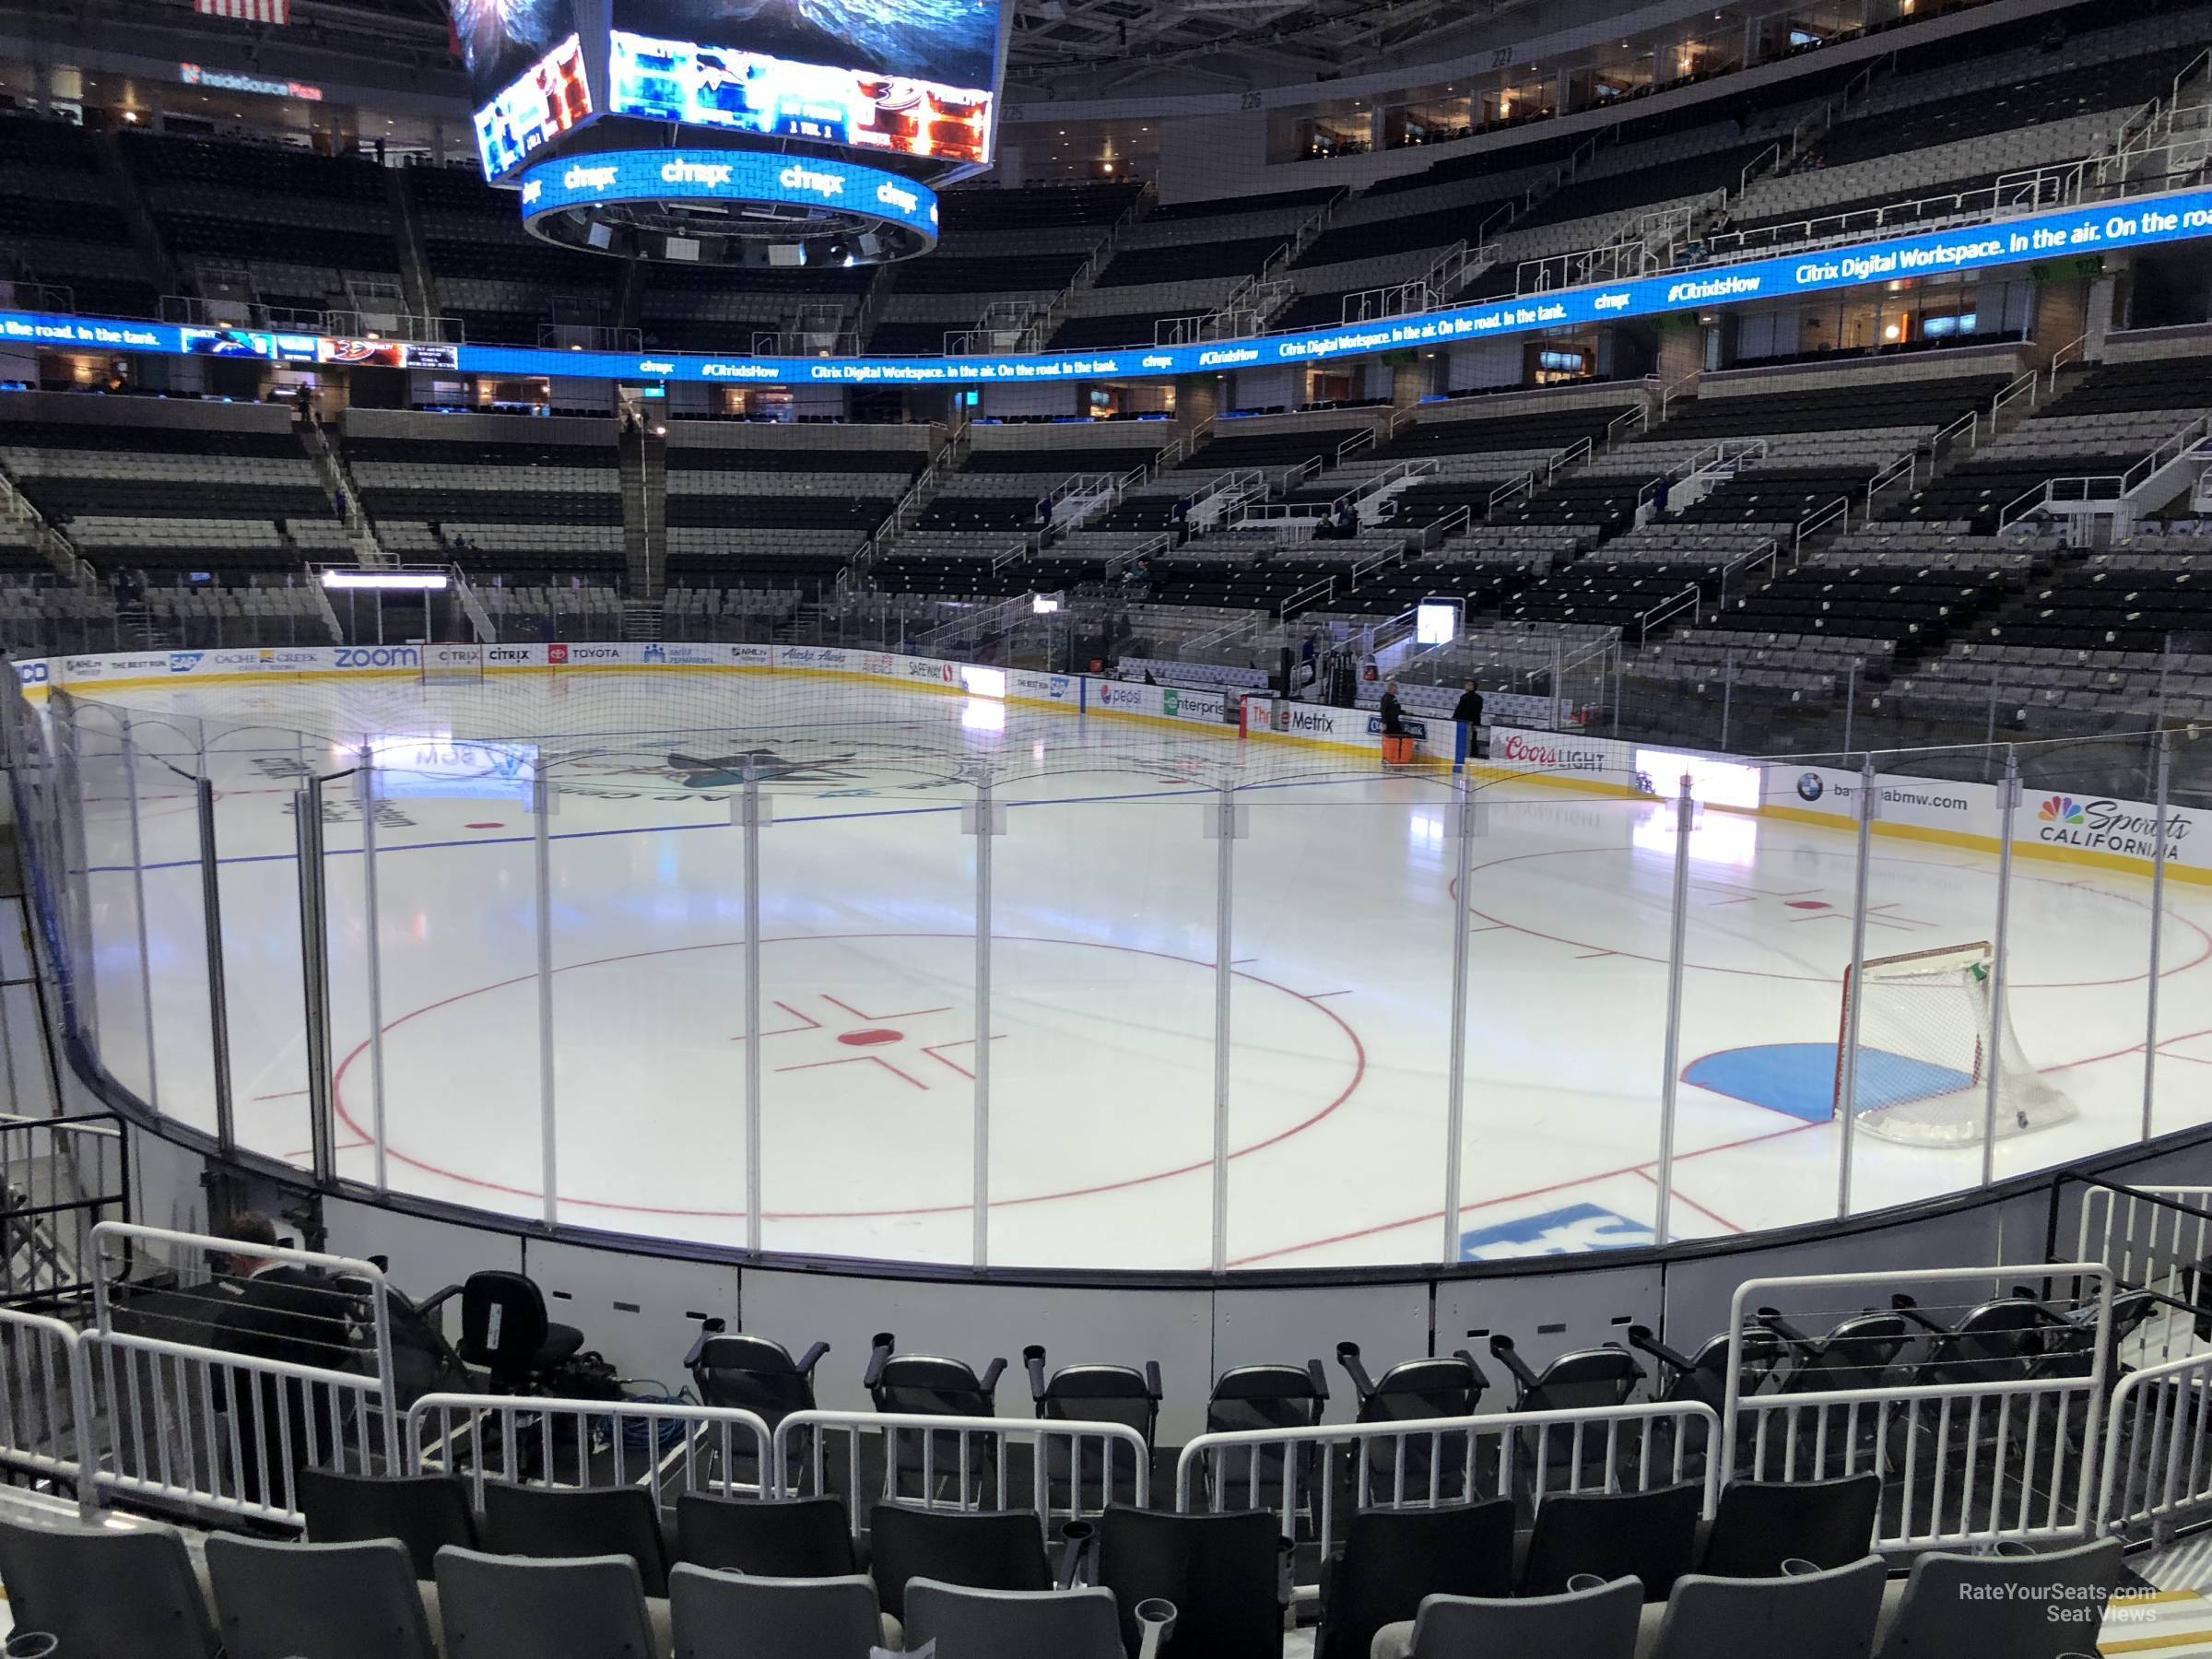 section 110, row 10 seat view  for hockey - sap center